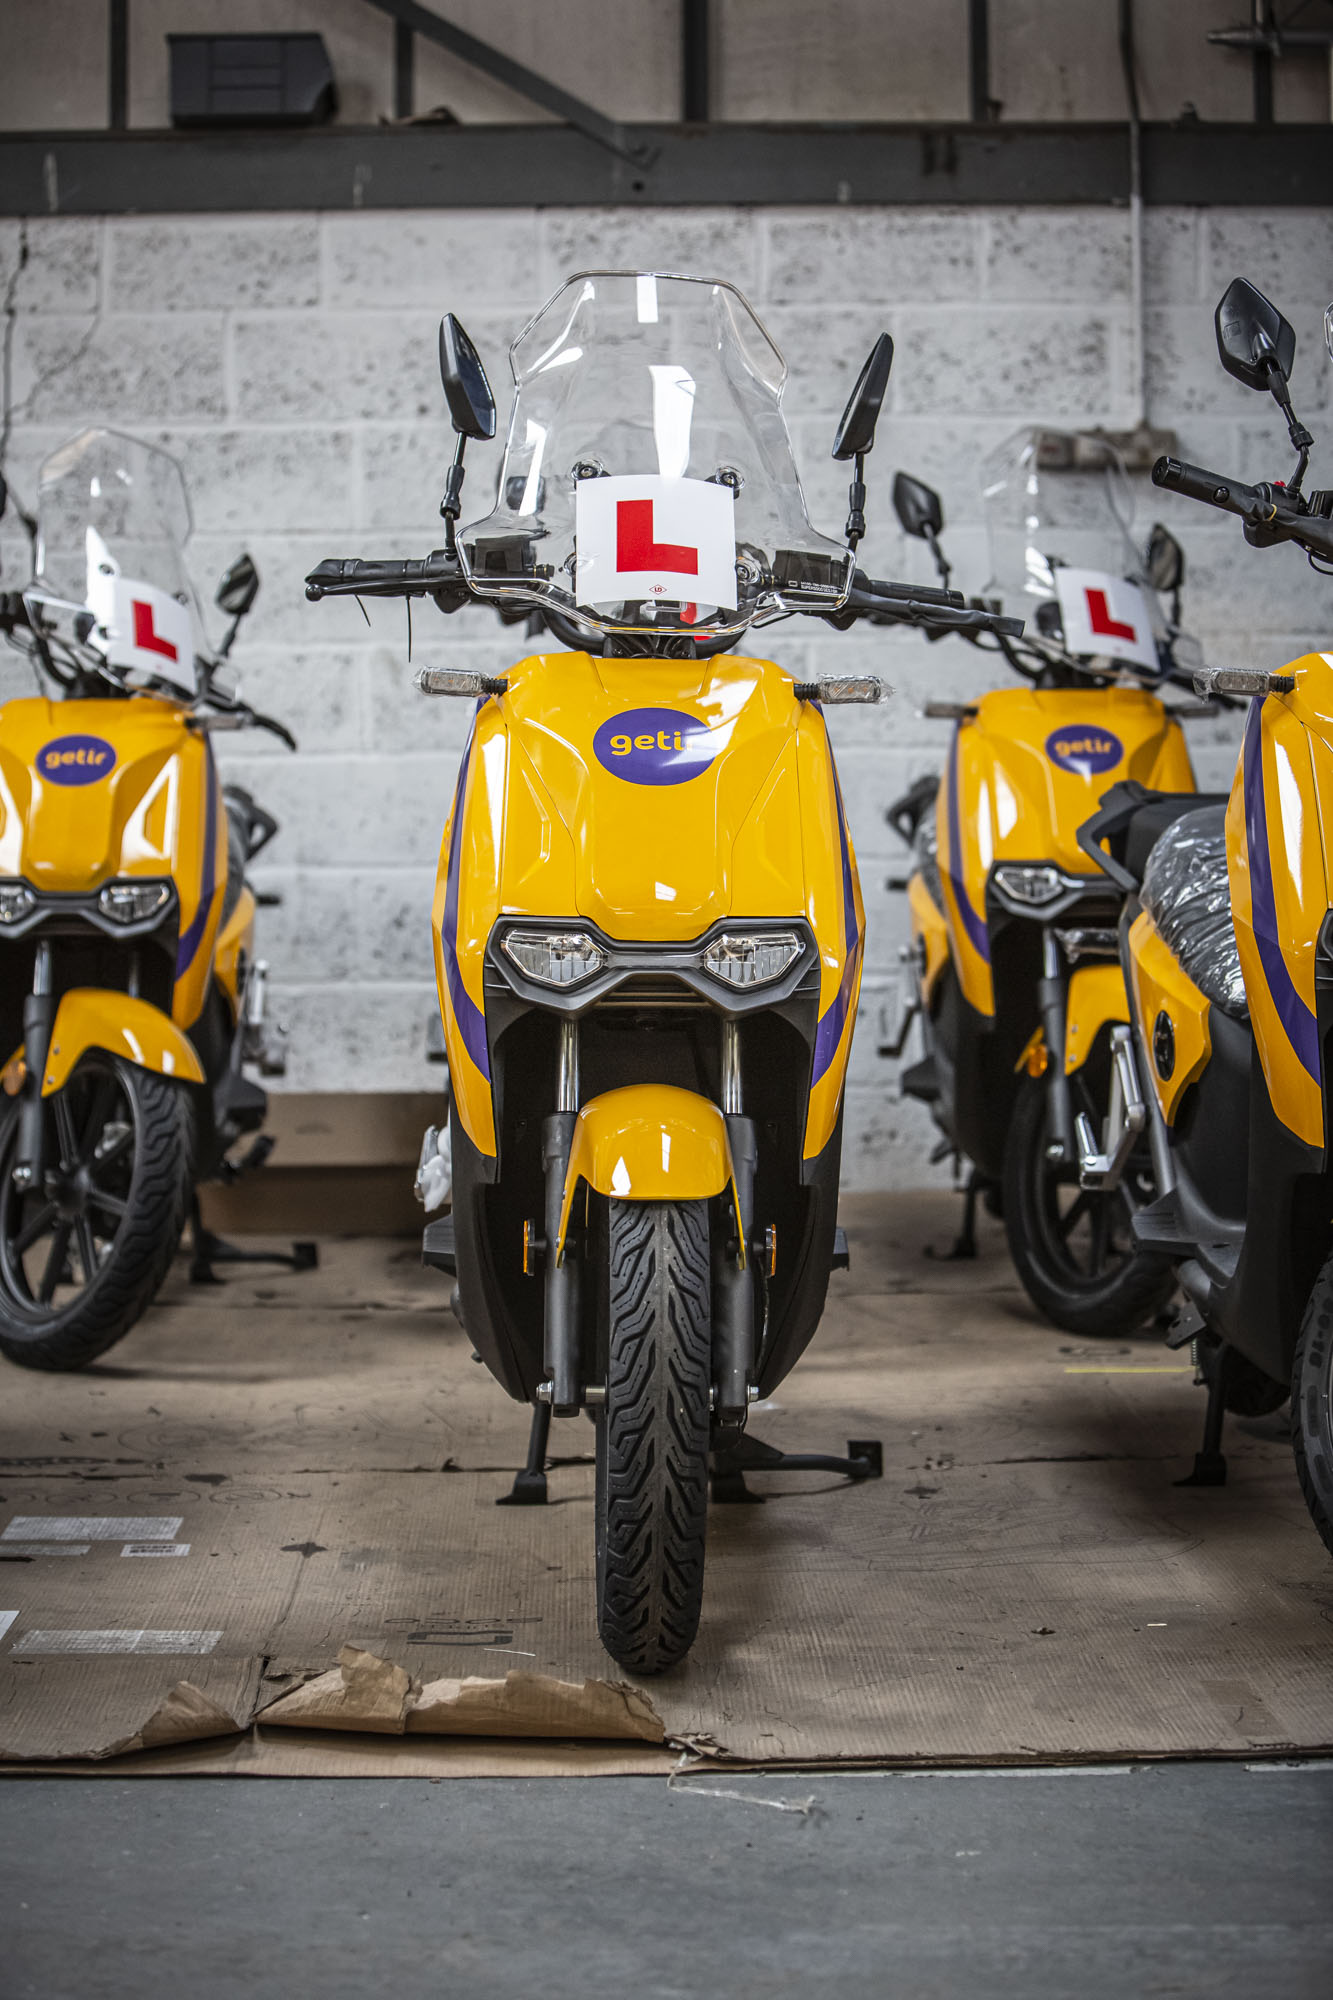 Super Soco CPx Getir Delivery scooters for GreenMo UK